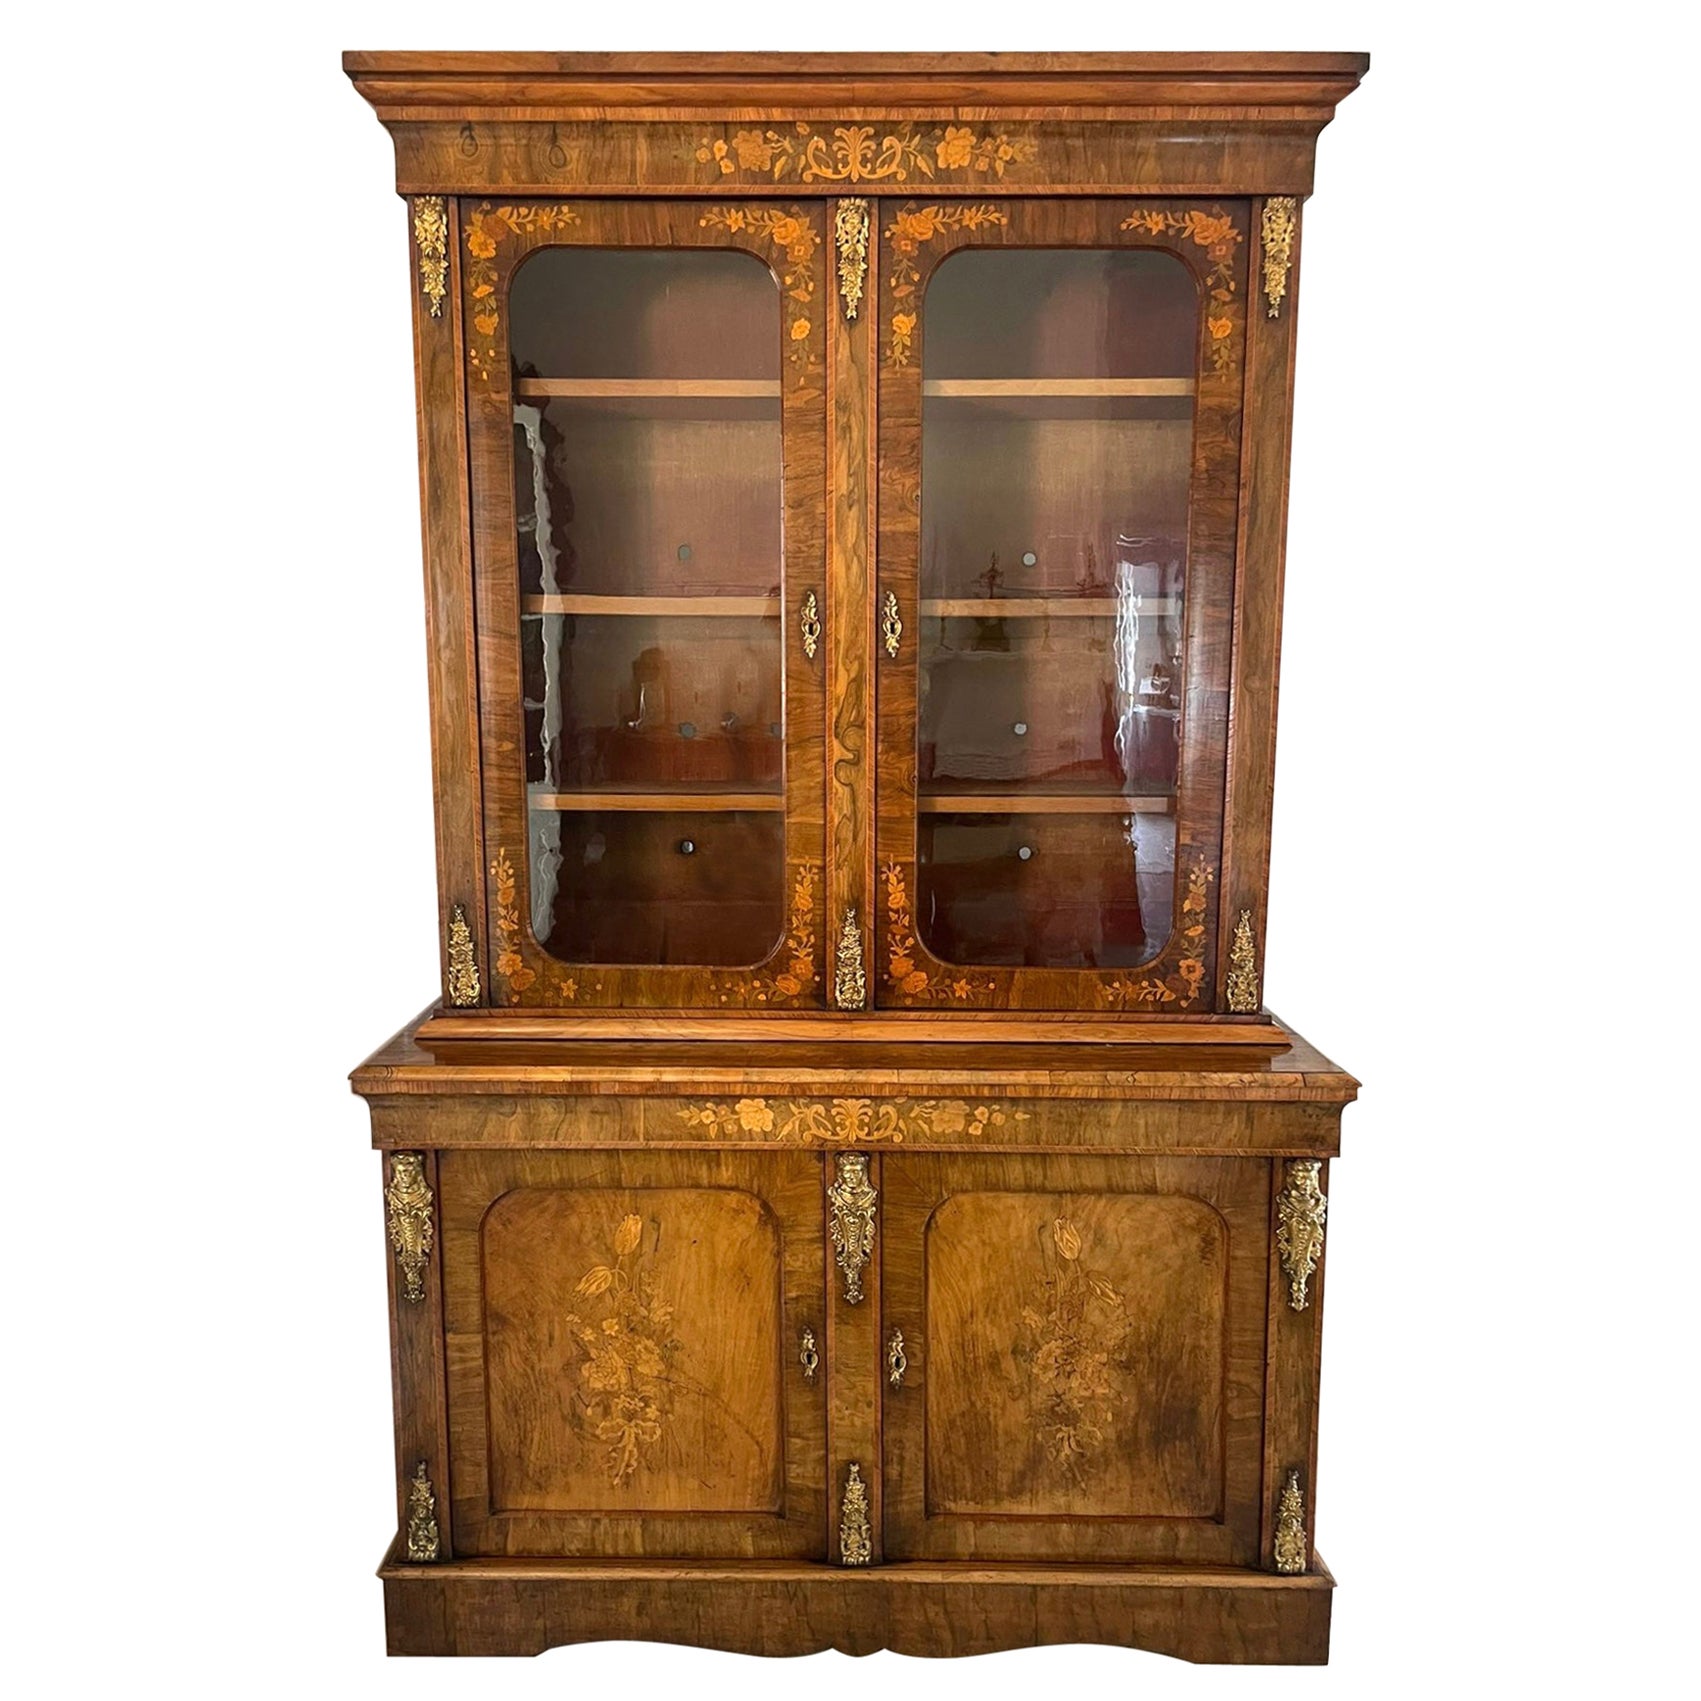 Fantastic Antique Burr Walnut Marquetry Inlaid Ormolu Mounted Bookcase Cabinet For Sale